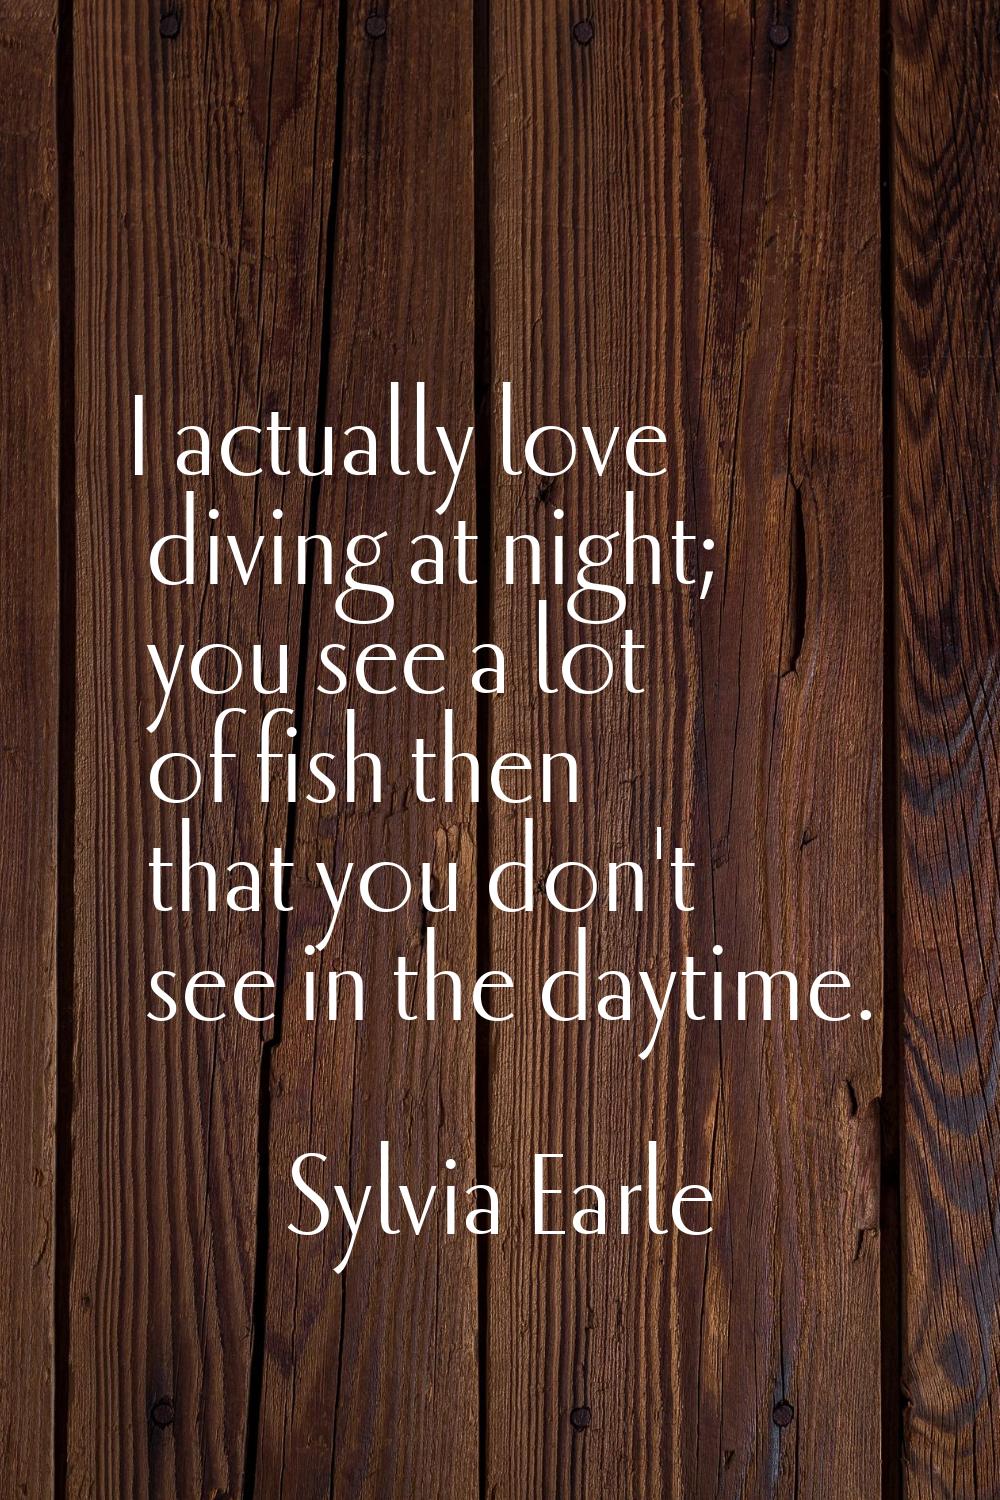 I actually love diving at night; you see a lot of fish then that you don't see in the daytime.